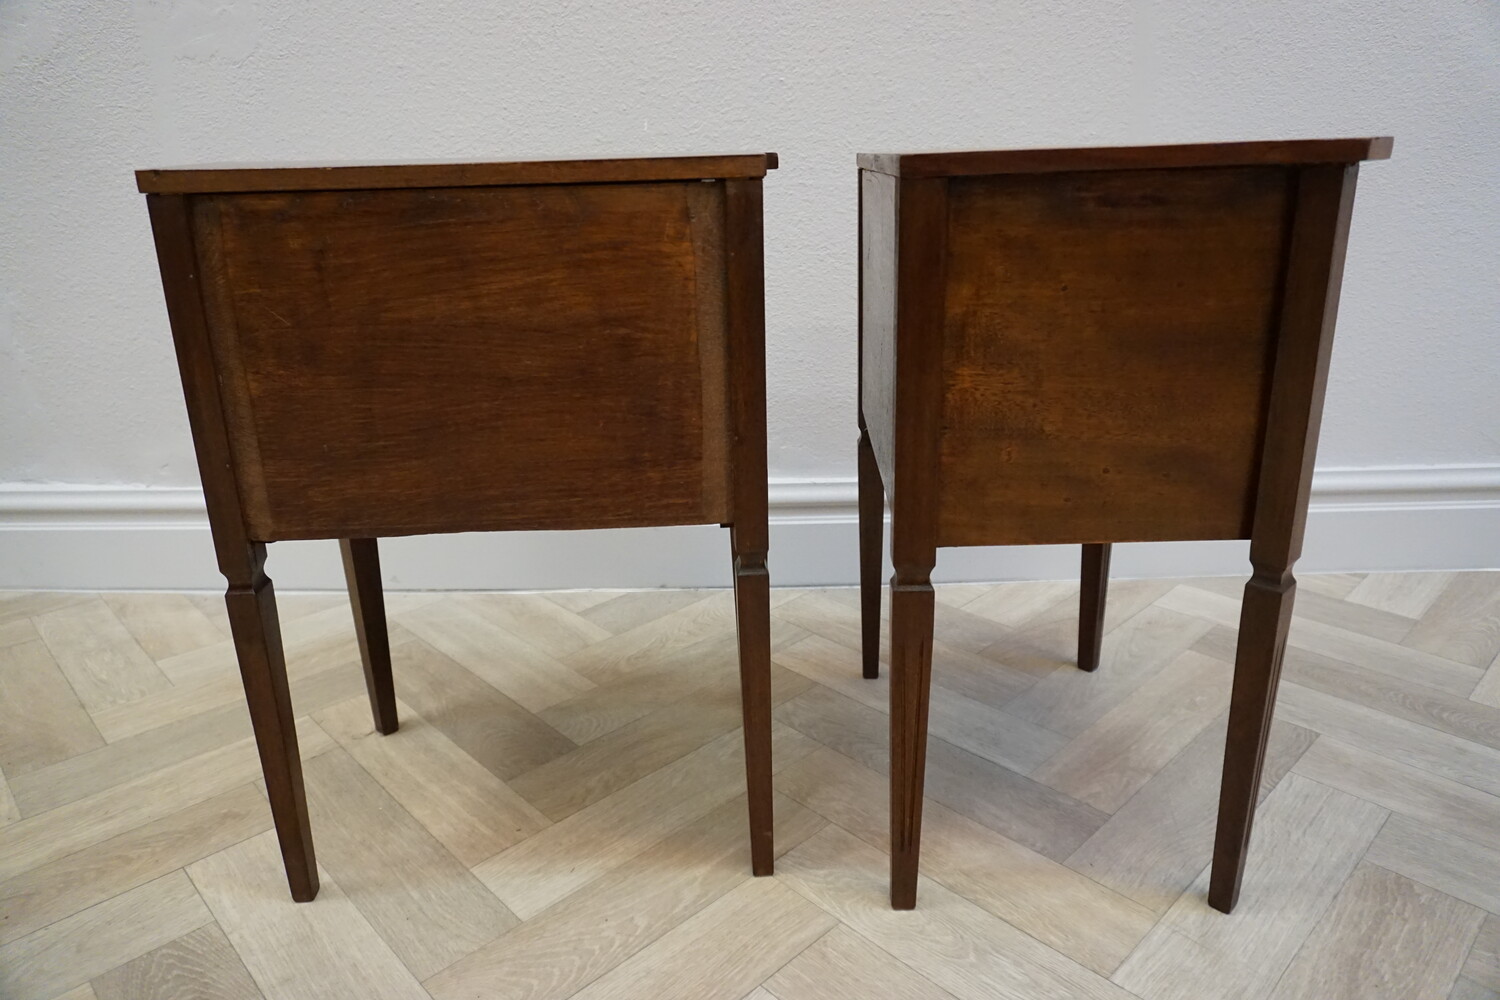 Pair of mahogany bedside tablesSOLD